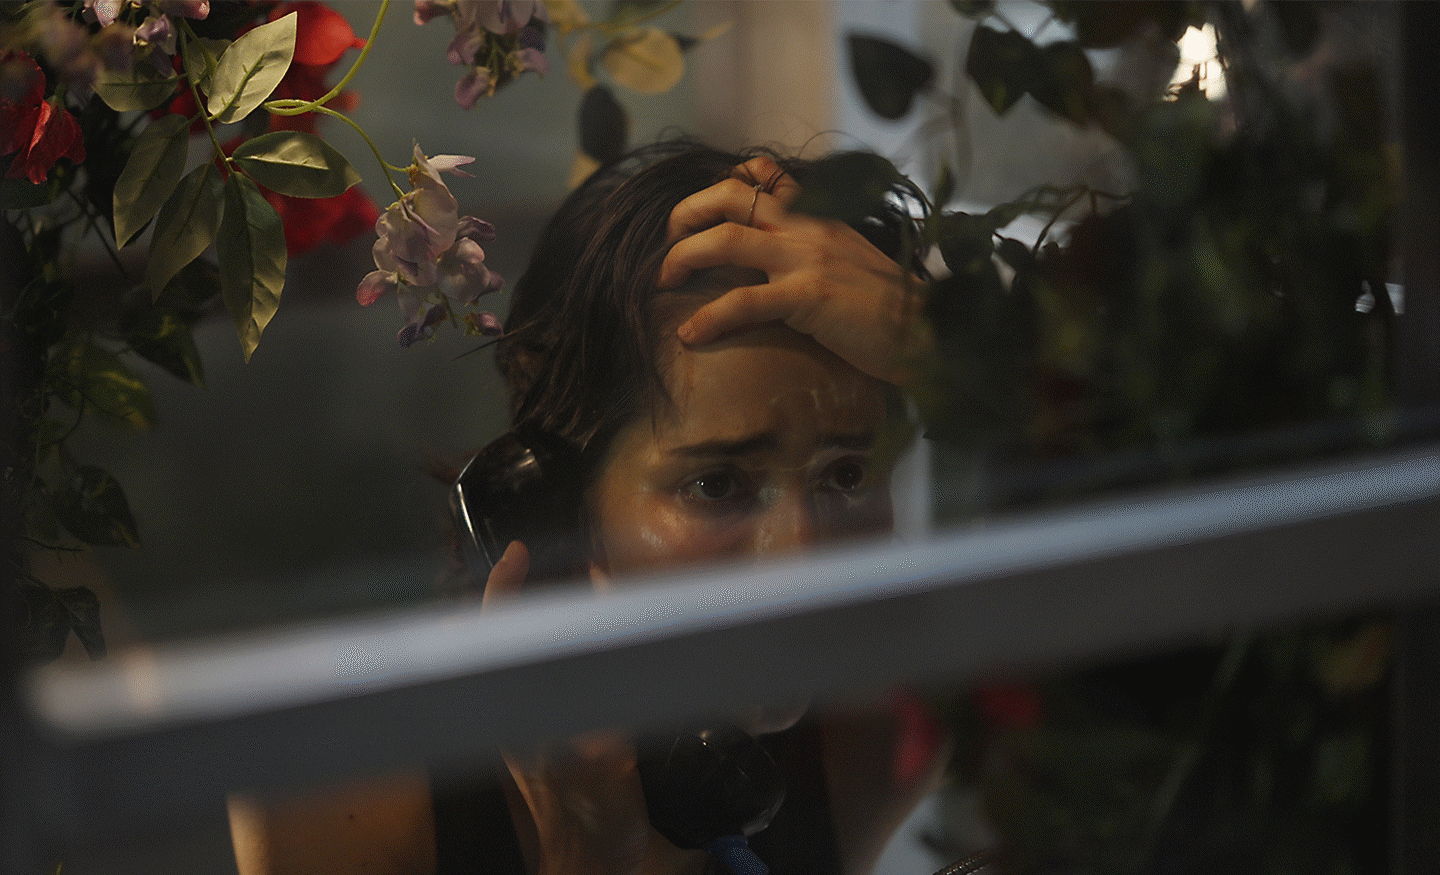  Image through a window with a woman on the phone.